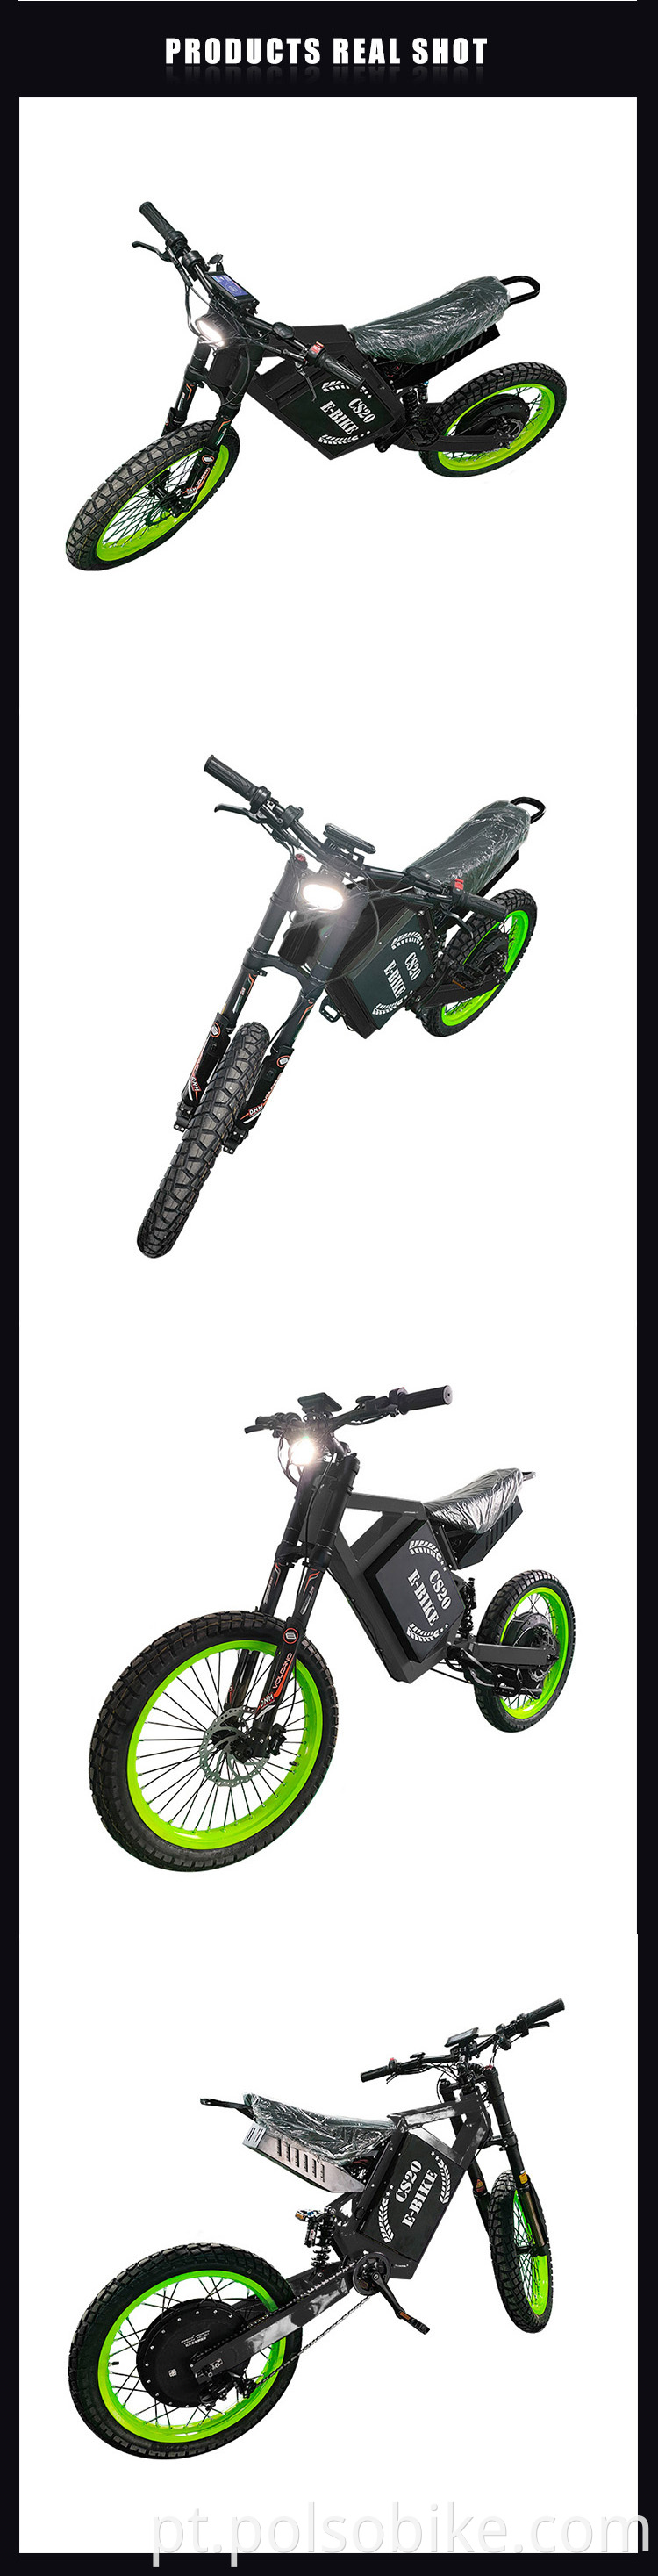 CS20 ebike off-road electric motorcycle